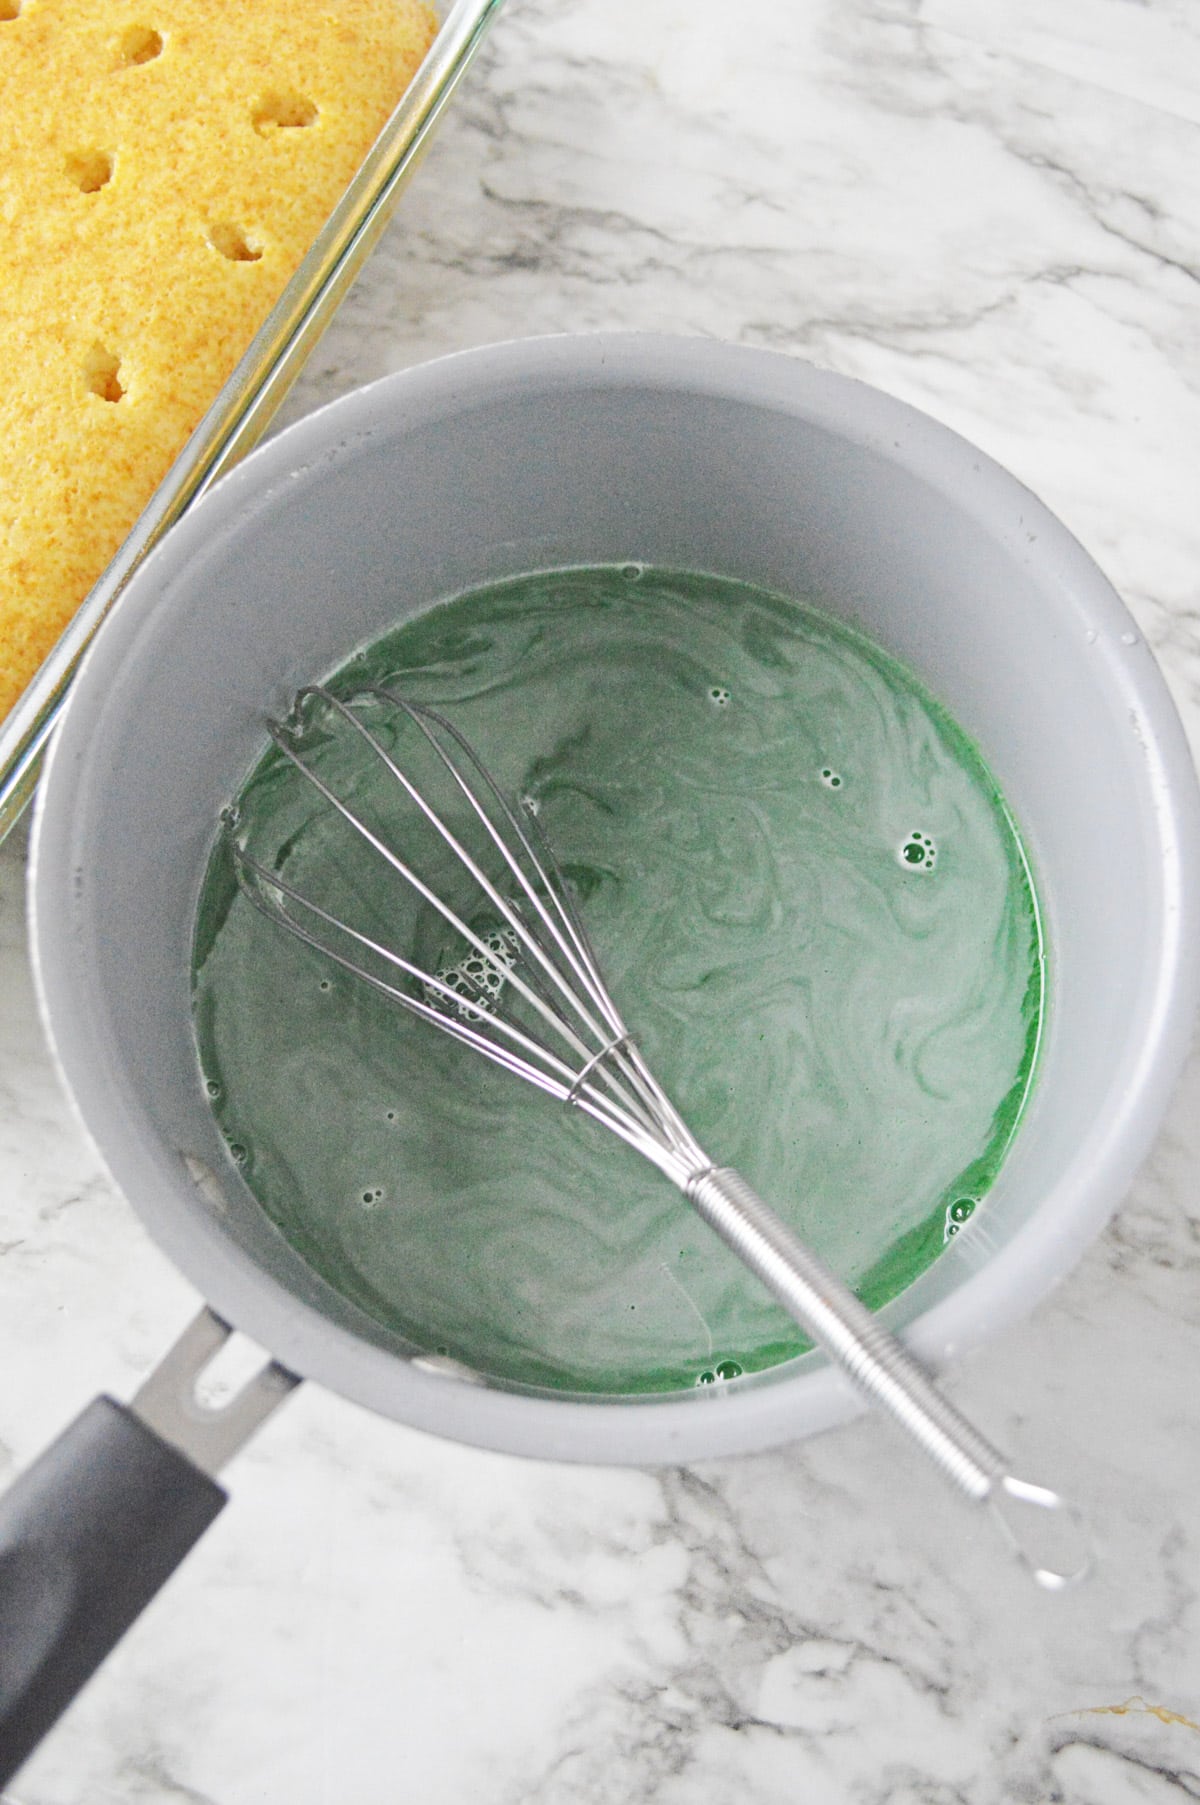 Green jello in saucepan with whisk